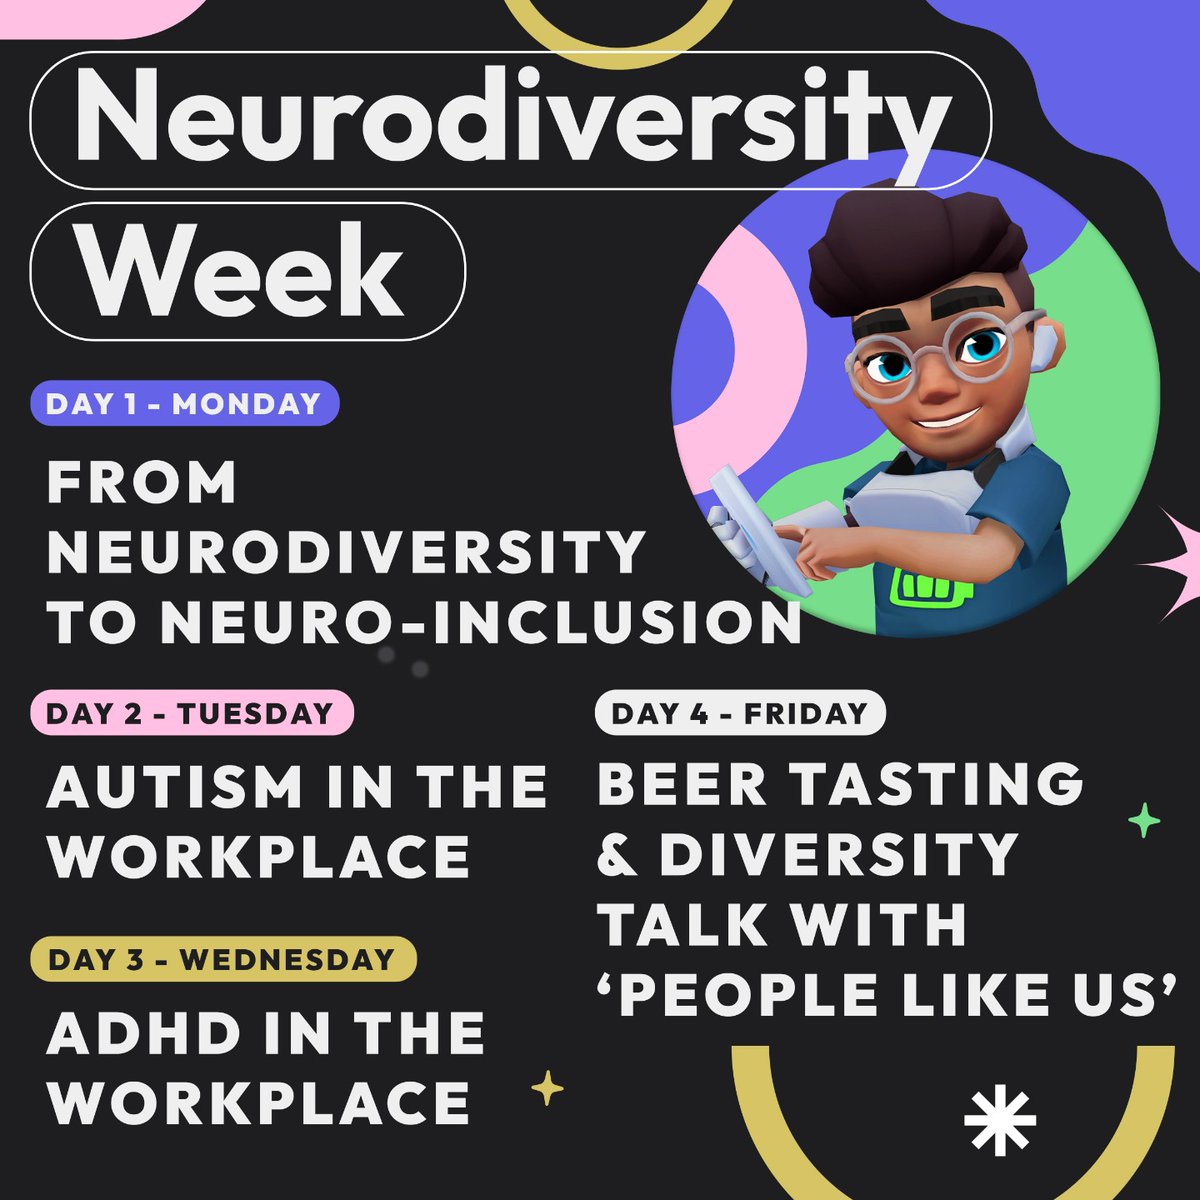 SYBO is proud to announce its first-ever Neurodiversity Week! A group of passionate SYBOians have organized an week of activities — one talk featuring a special guest speaker, two fireside chats hosted by fellow colleagues, and a talk/beer tasting with People Like Us.